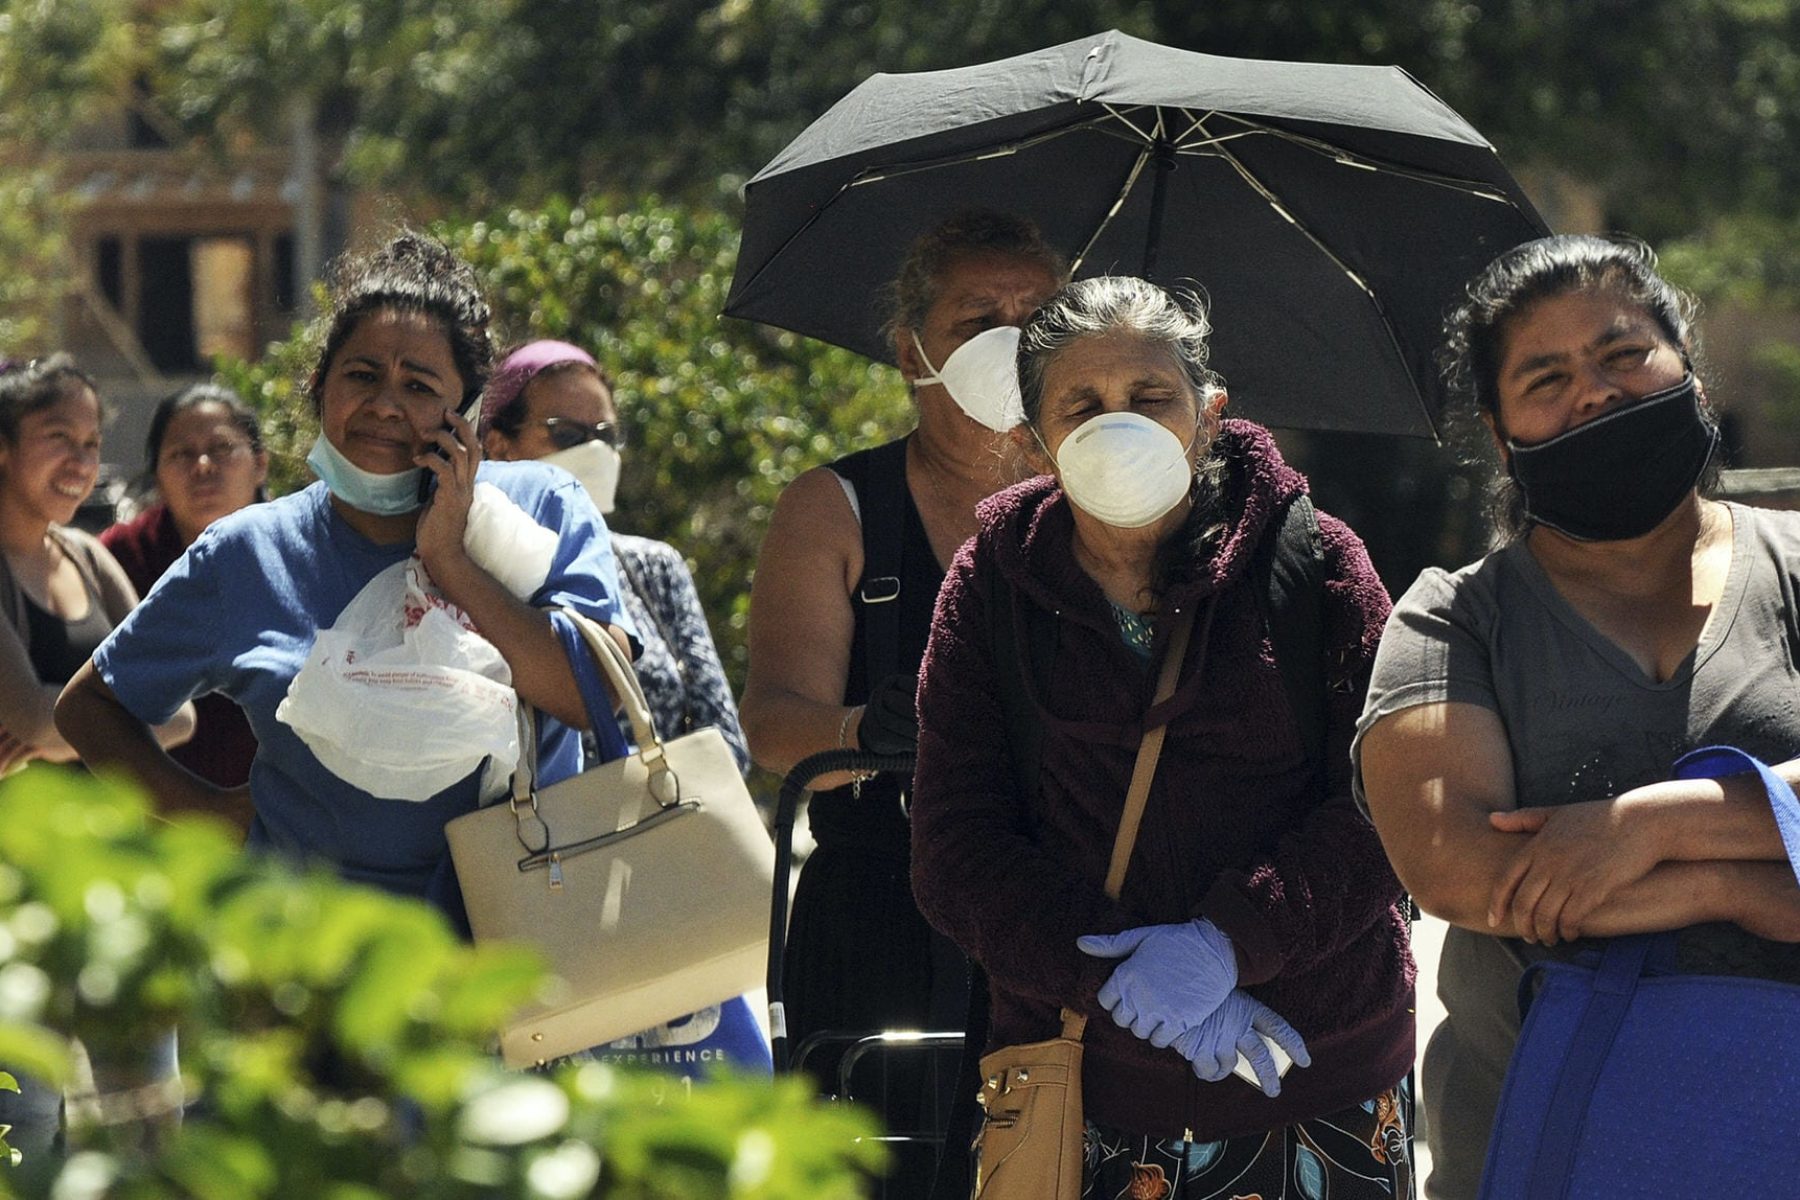 Women wearing protective masks wait in a queue to receive food assistance provided by the Second Harvest Food Bank of Central Florida at a food distribution event staffed by volunteers at the Calvario City Church. Food banks across the United States are being overwhelmed due to the thousands of people who have lost their jobs due to the coronavirus (COVID-19) pandemic.